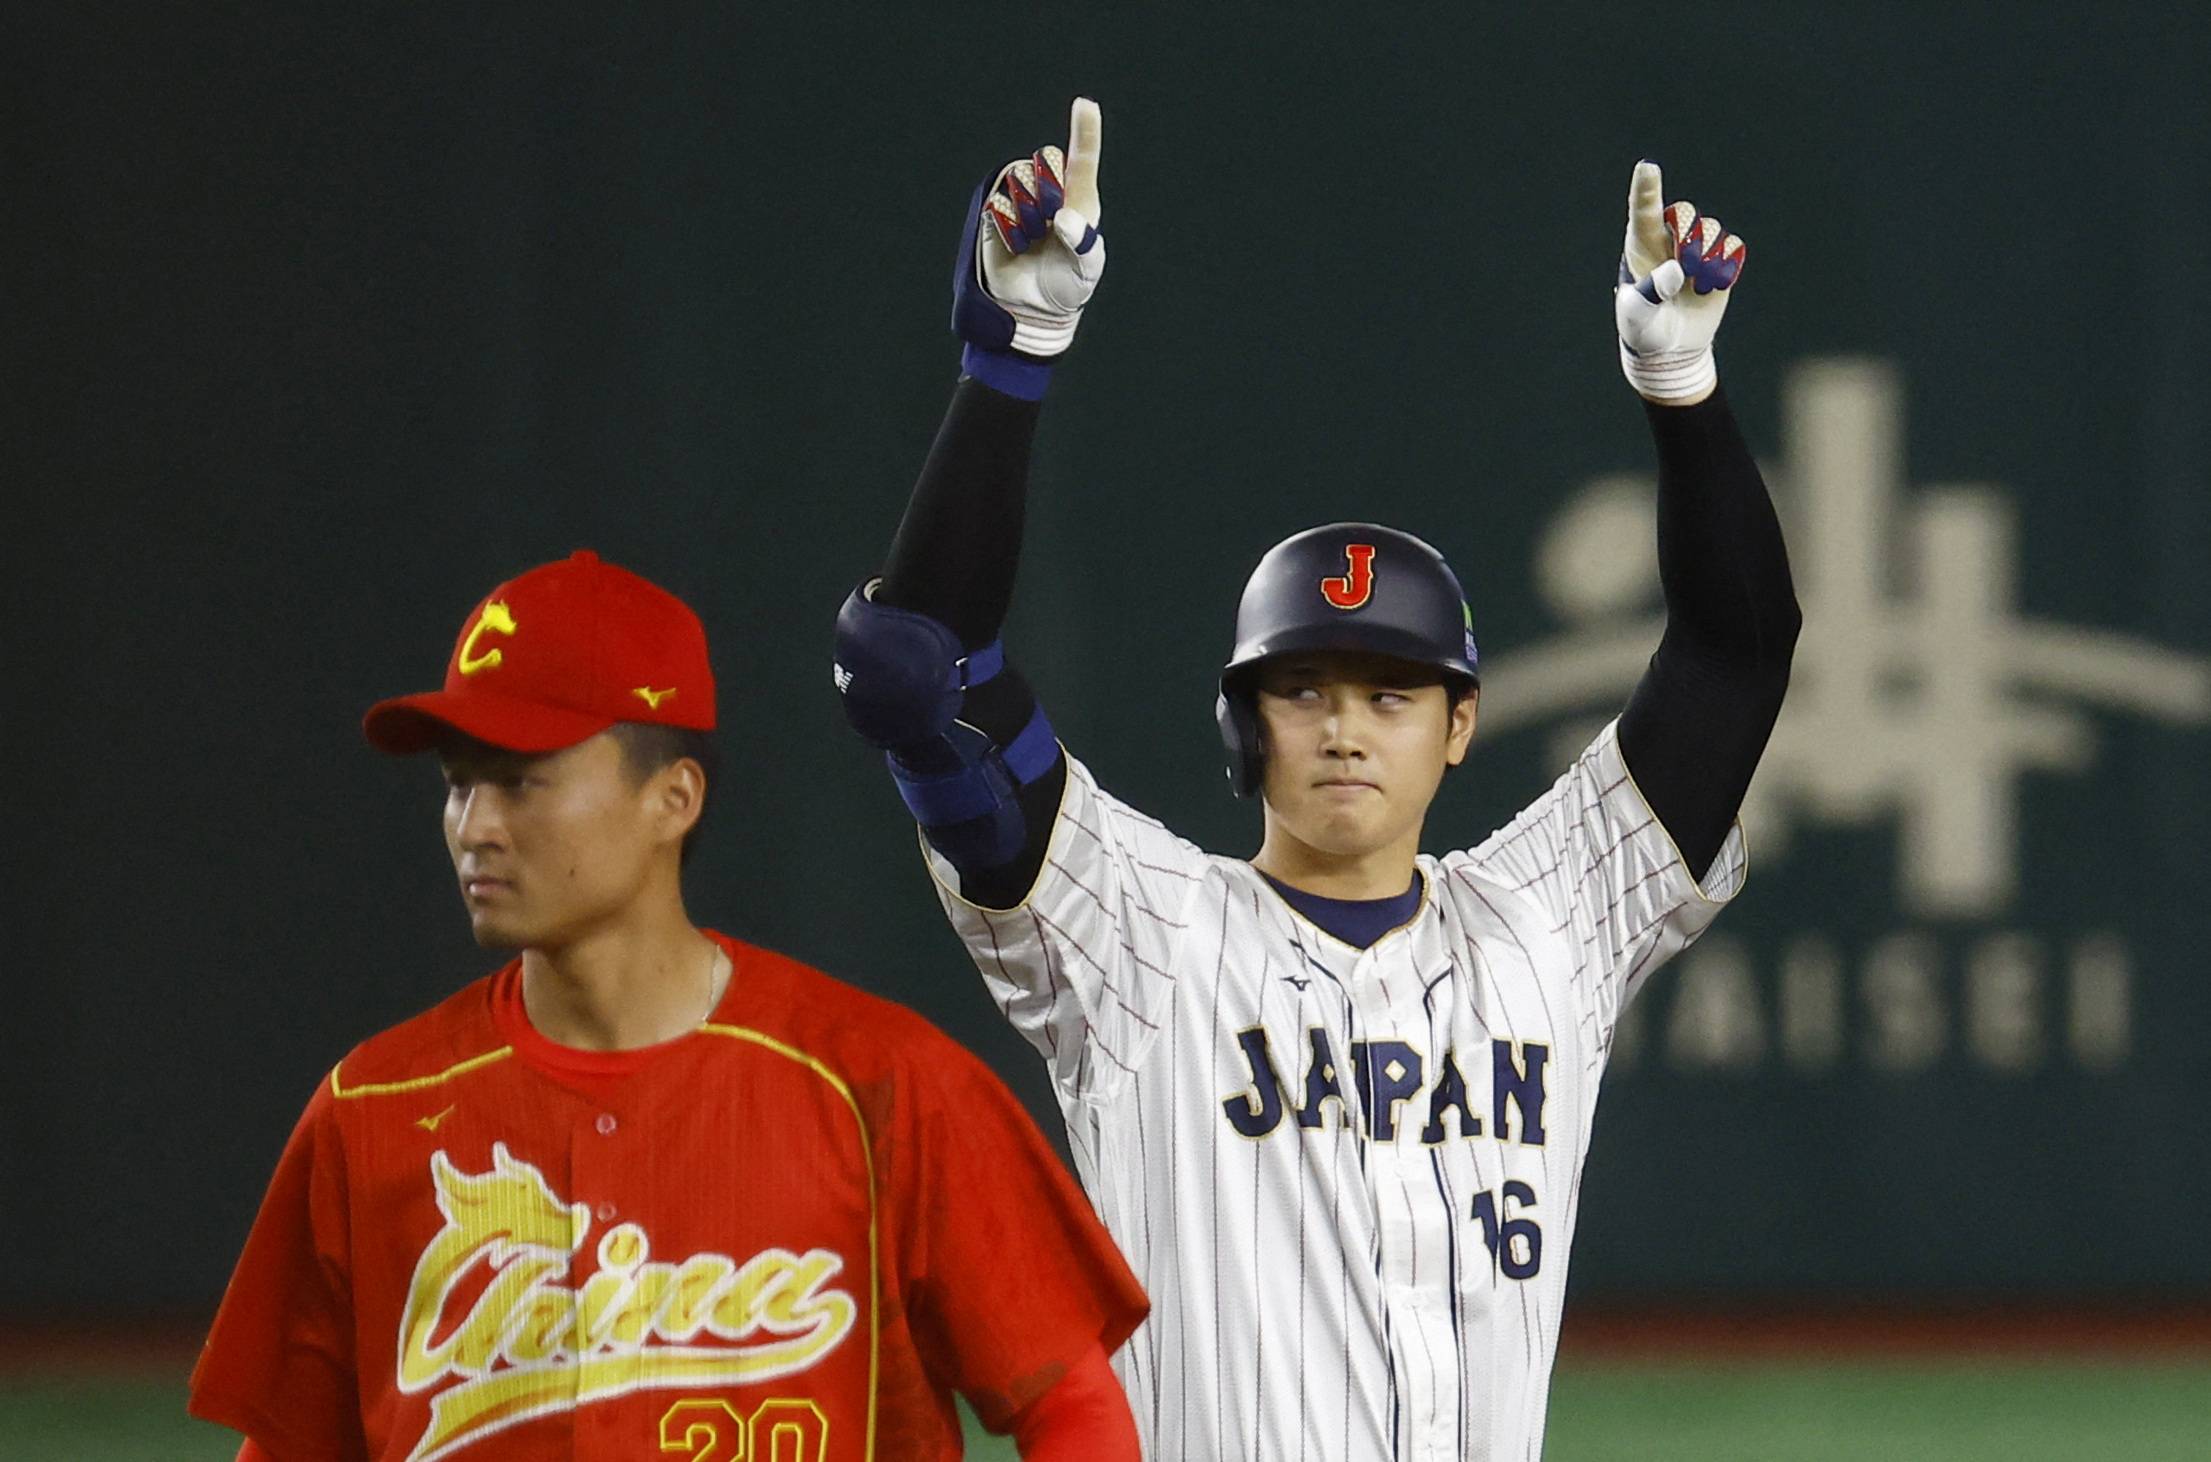 Shohei Ohtani captivates crowd, teammates and opponents in WBC